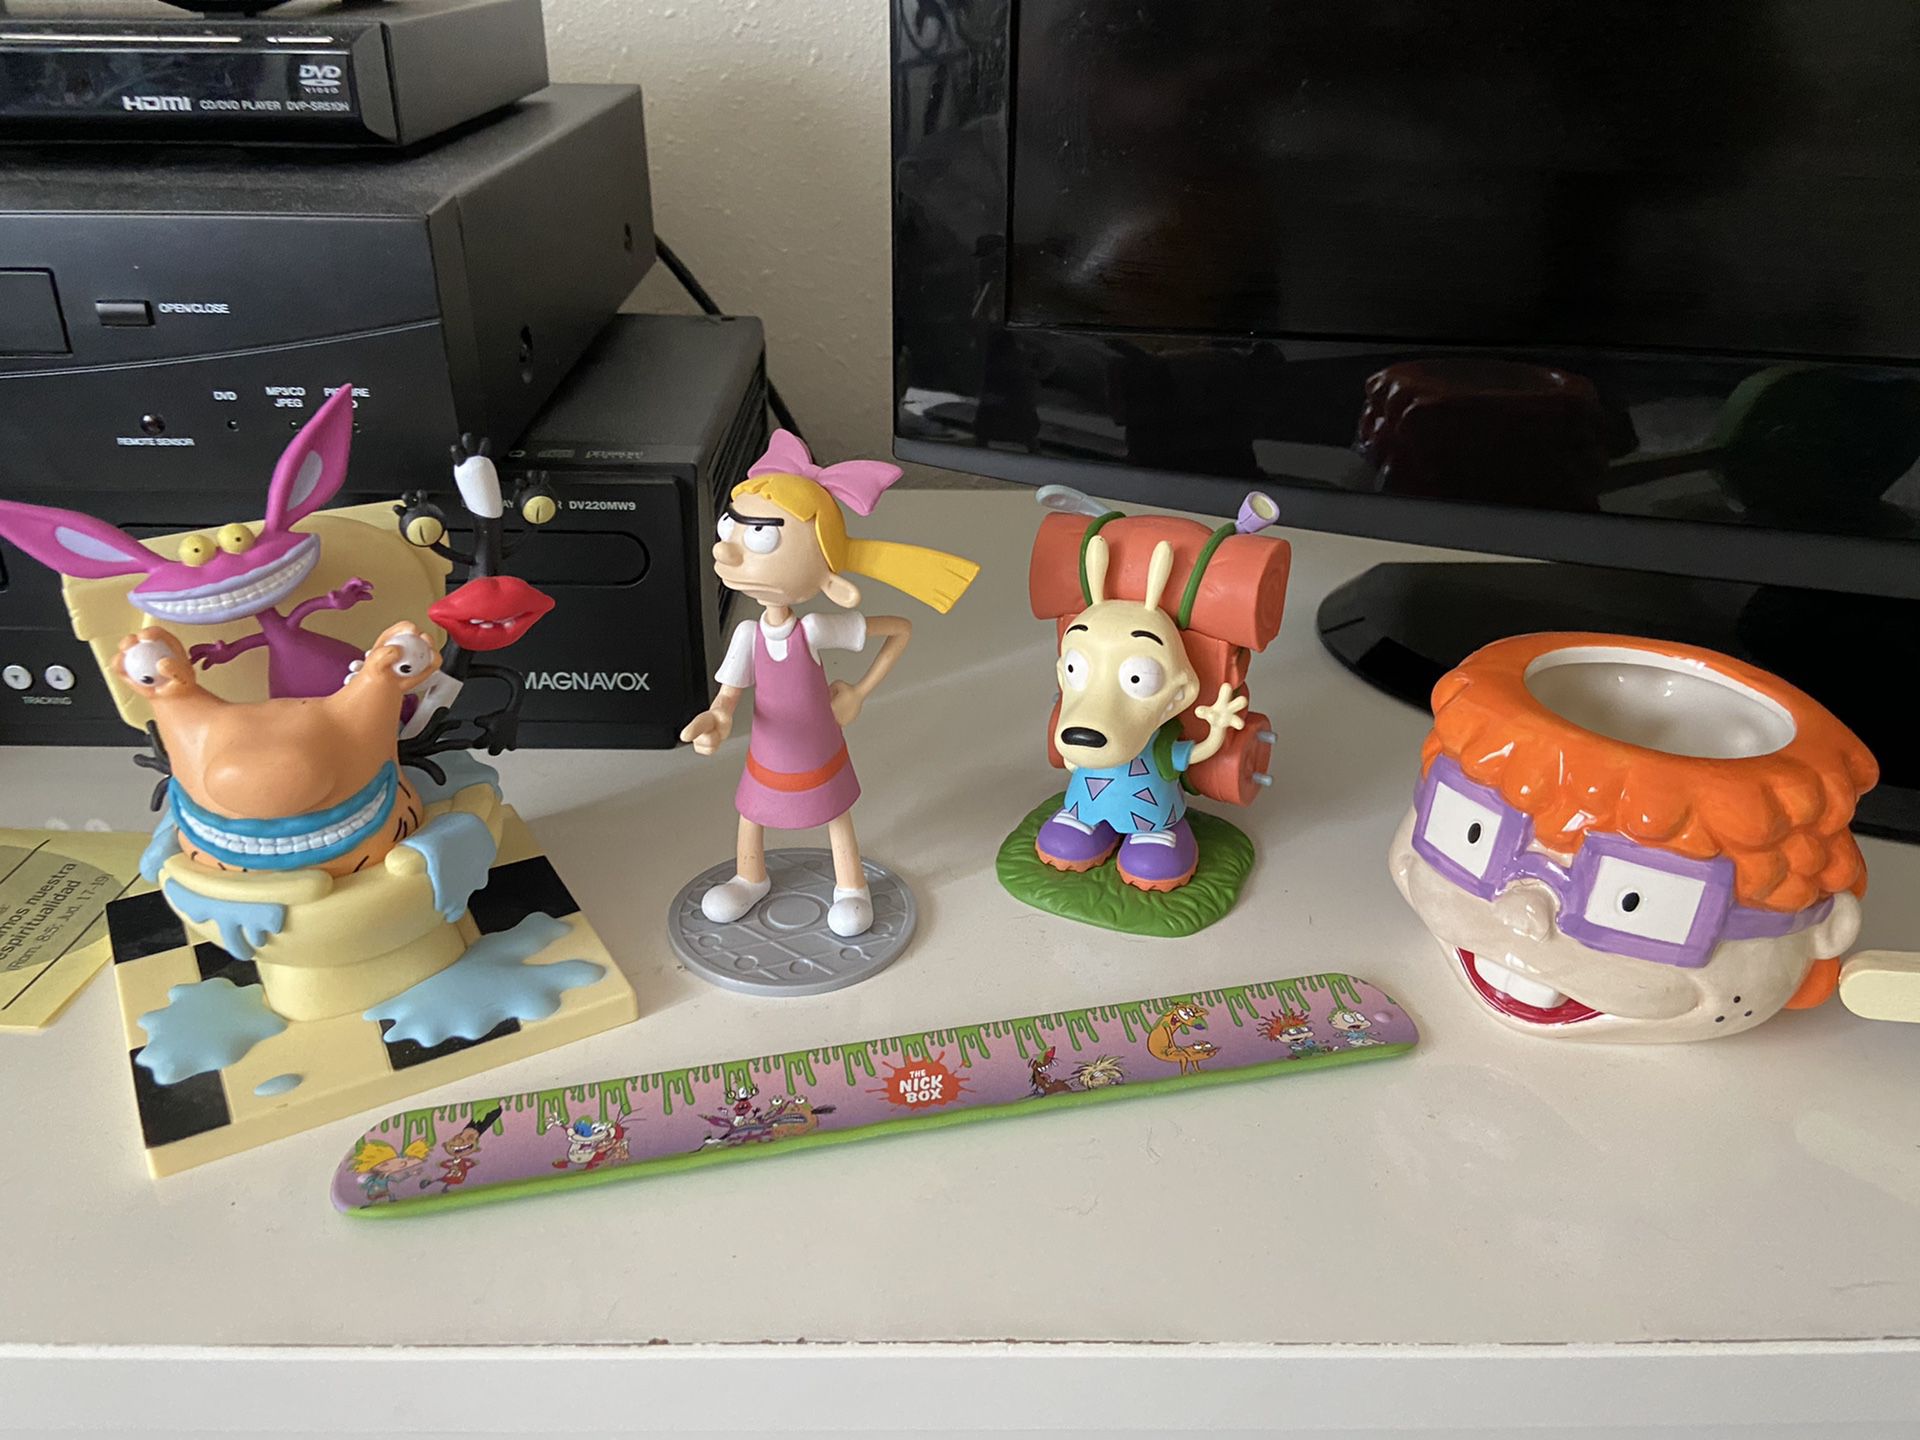 Nickelodeon toys collection